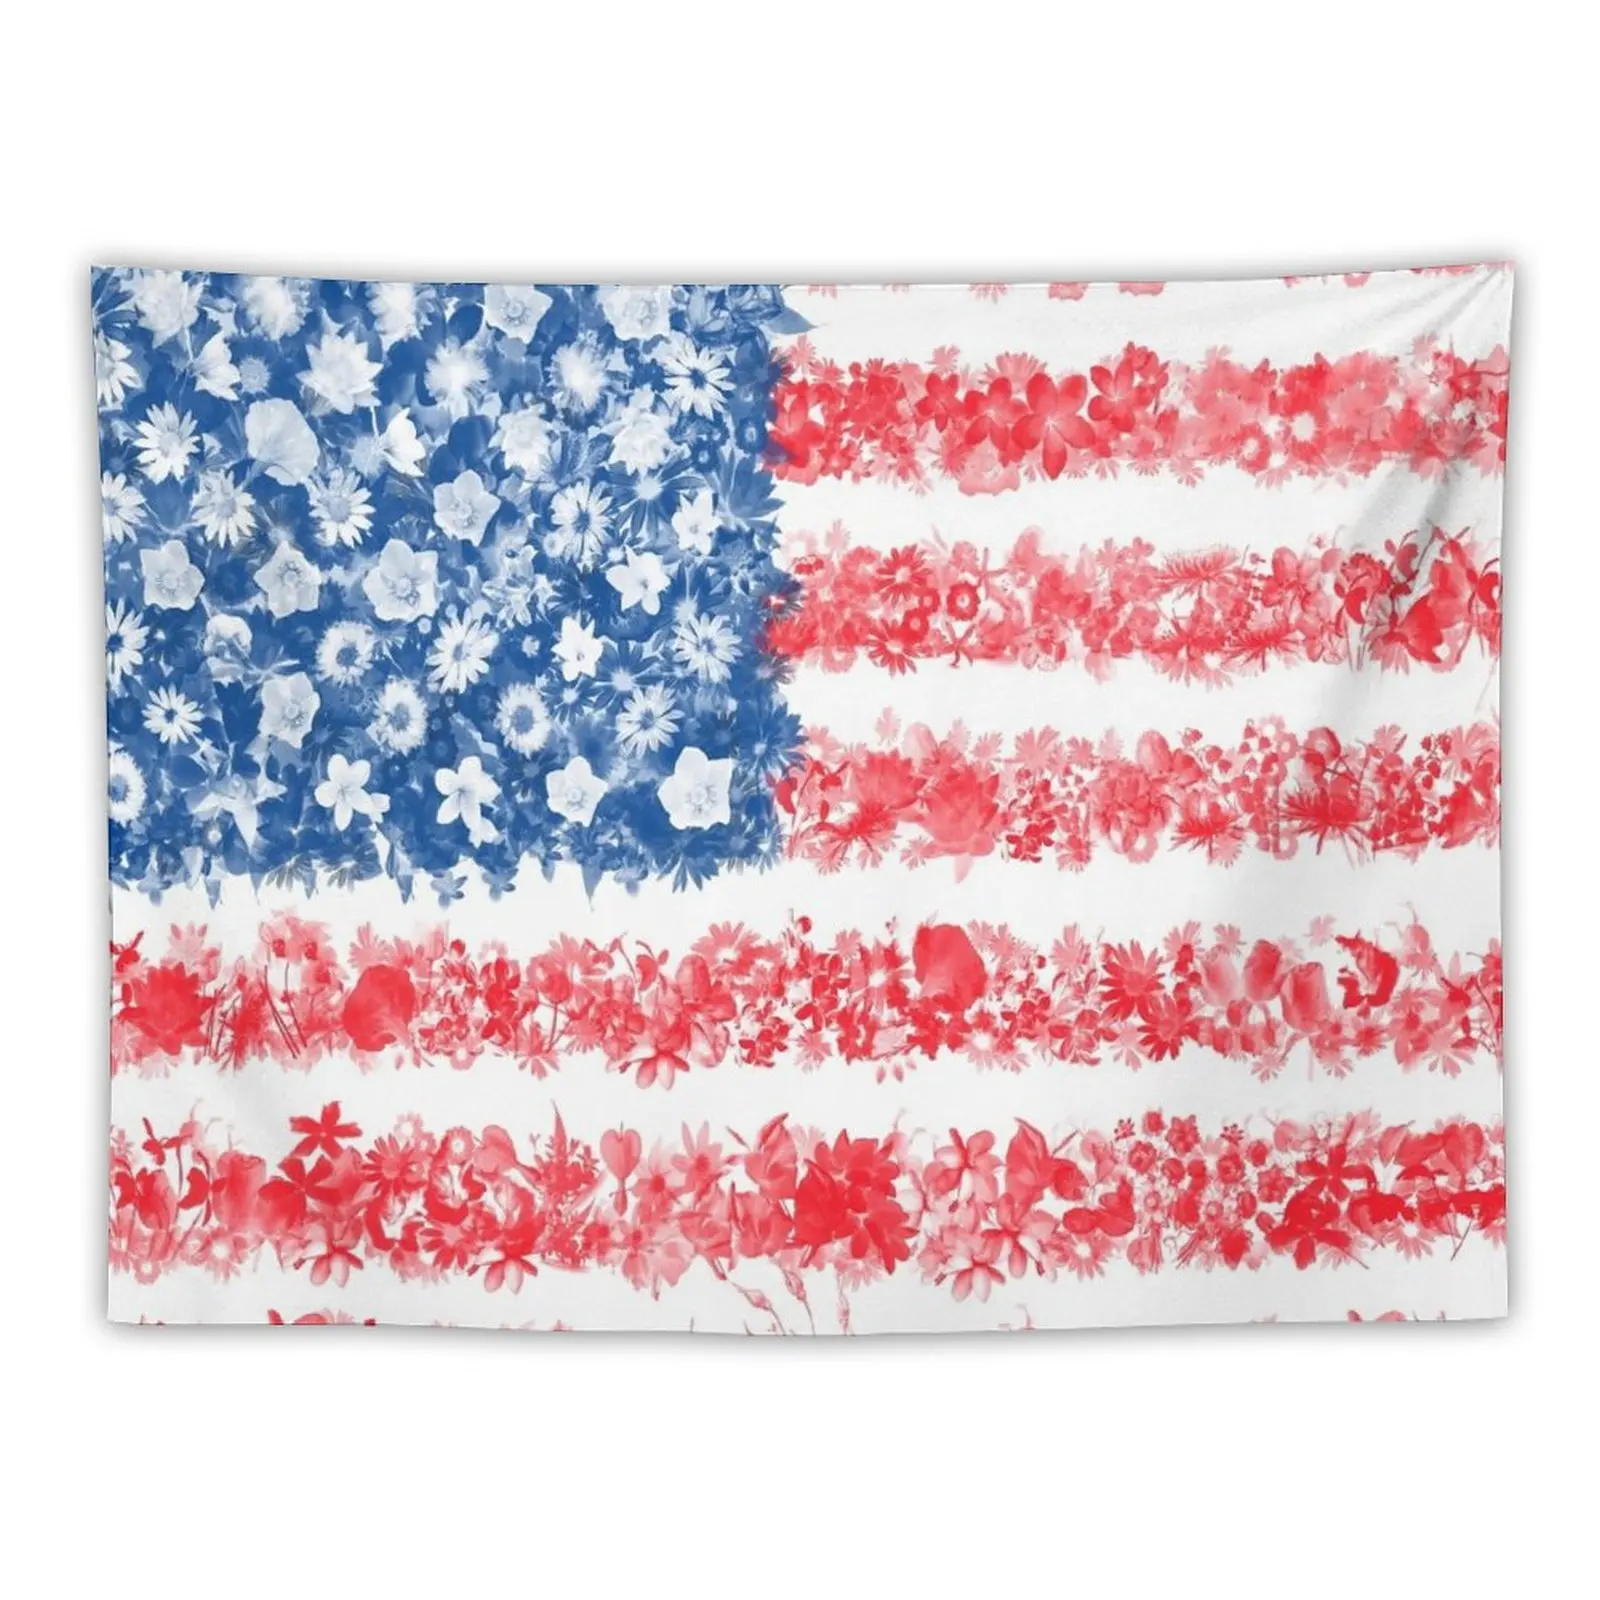 

usa flag Tapestry Decoration Aesthetic Aesthetic Room Decor Korean Decoration Home Tapestry